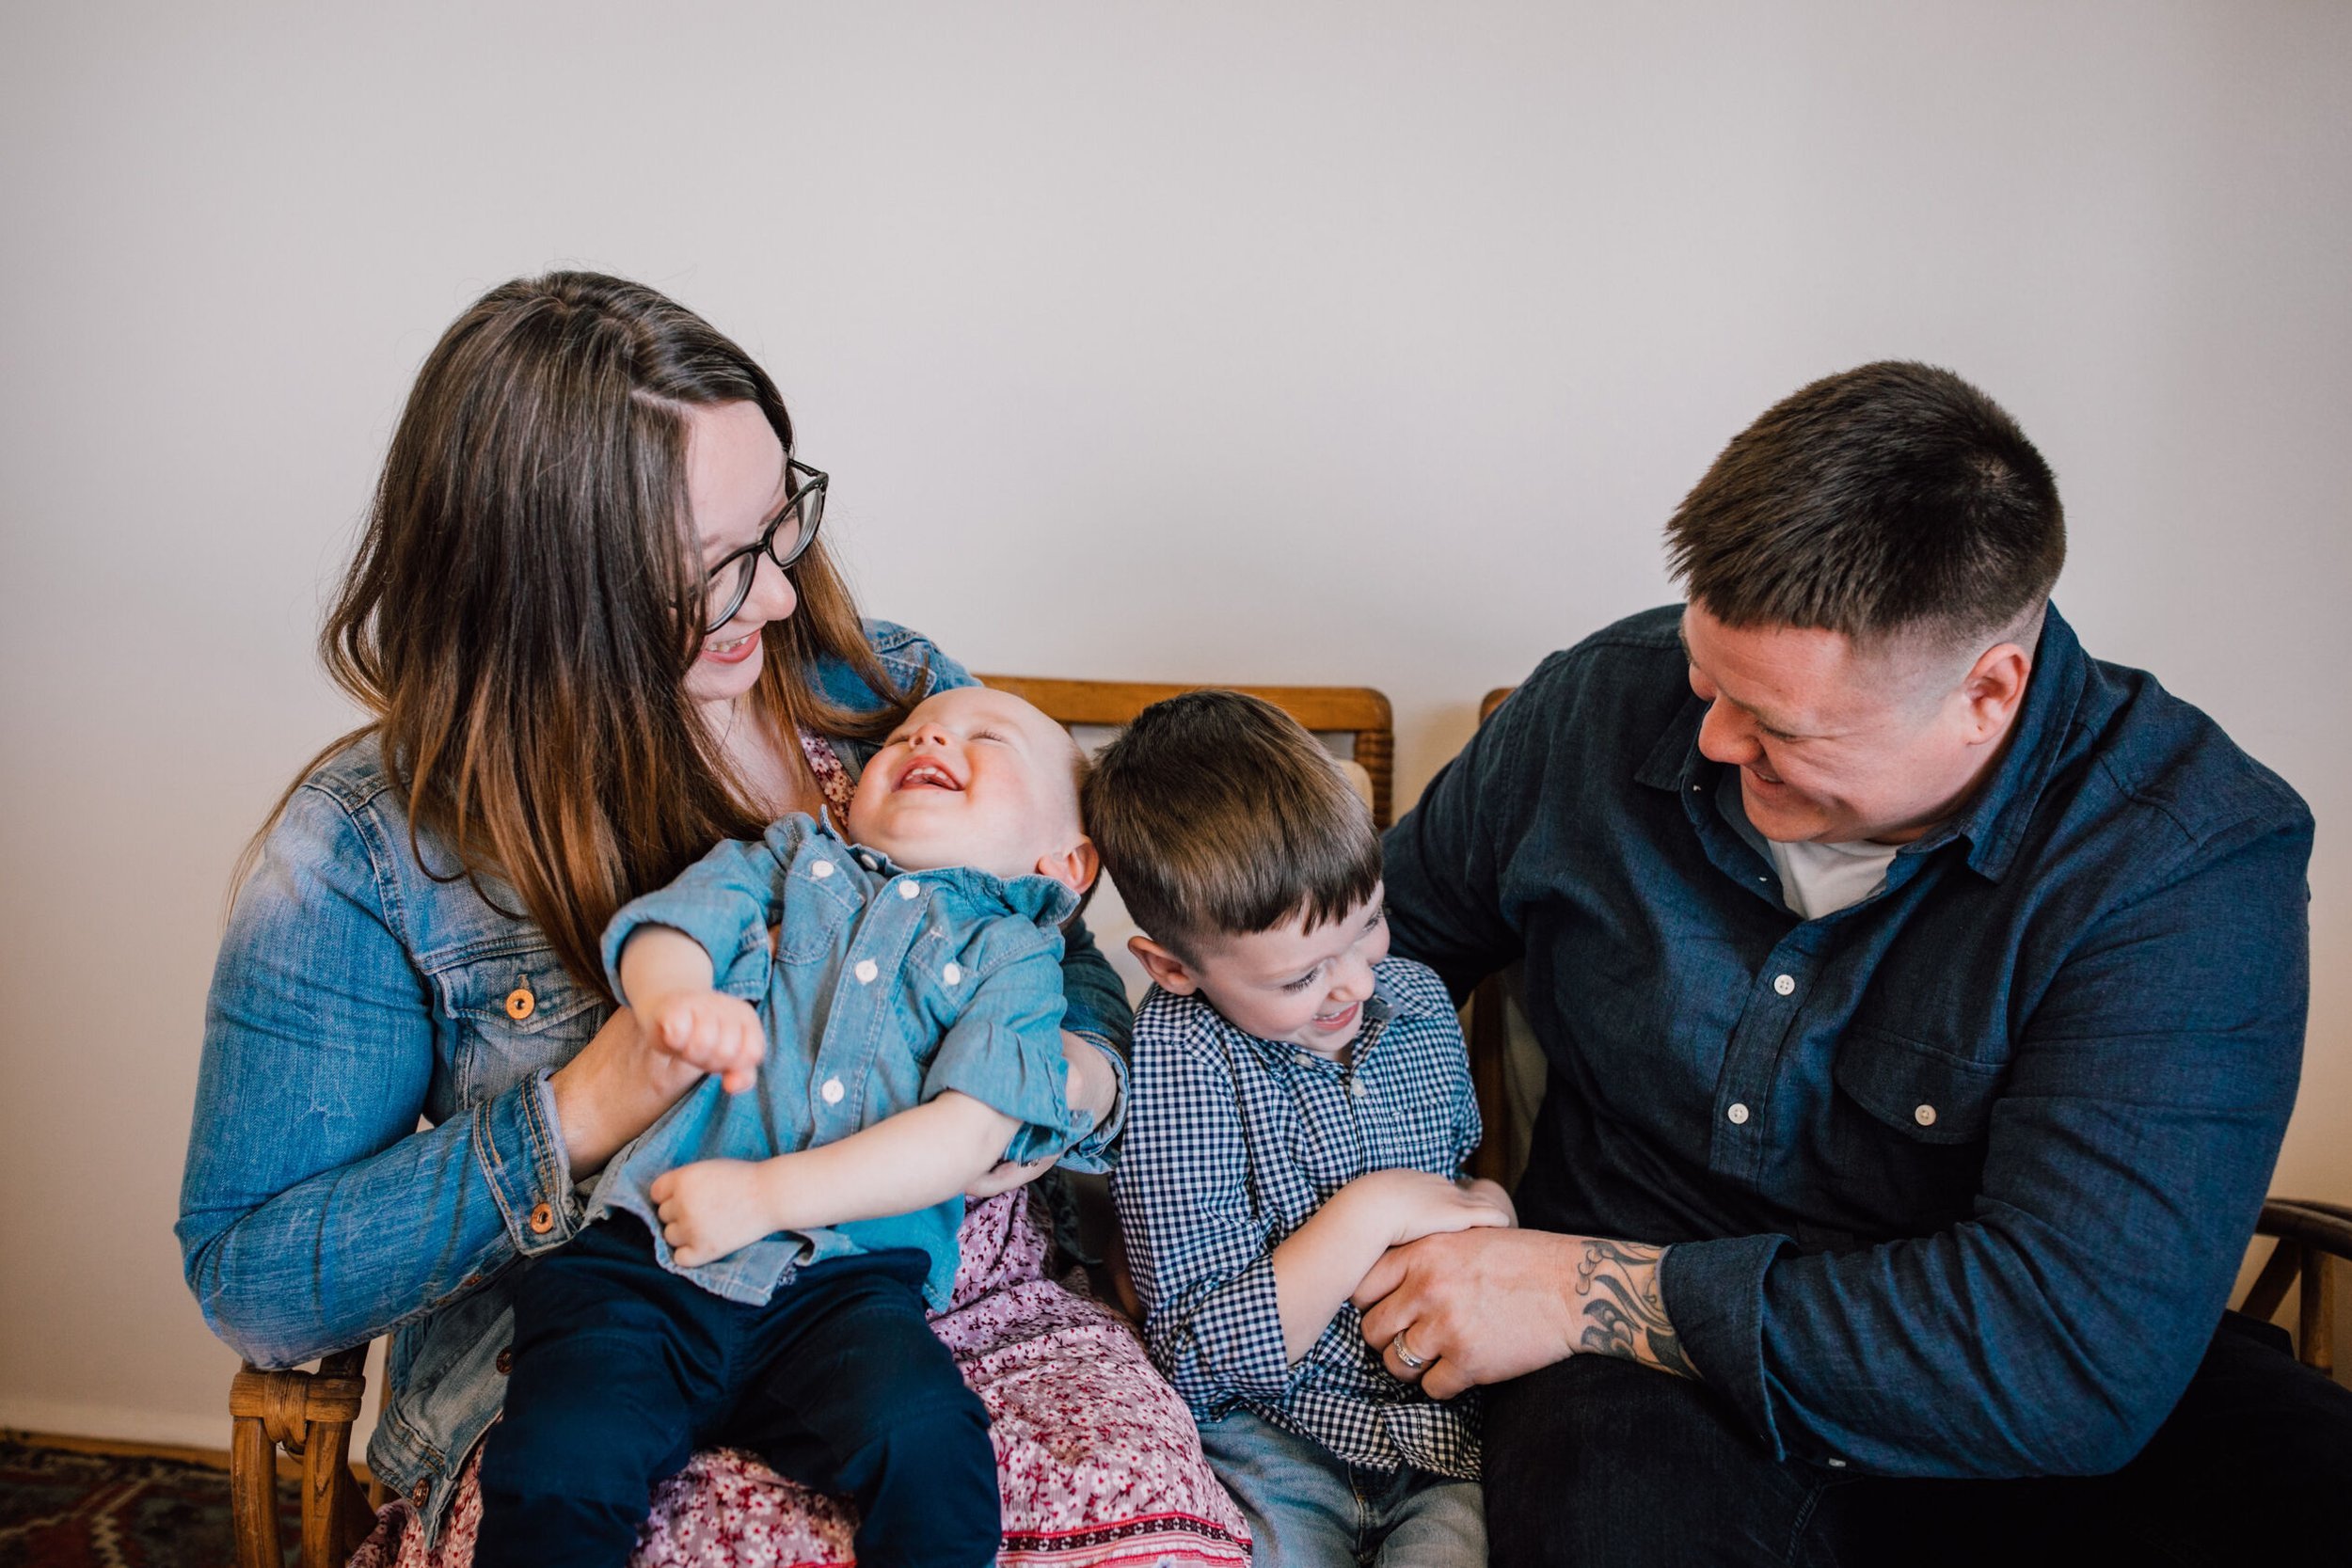  Family photographer captures a young family laughing together 